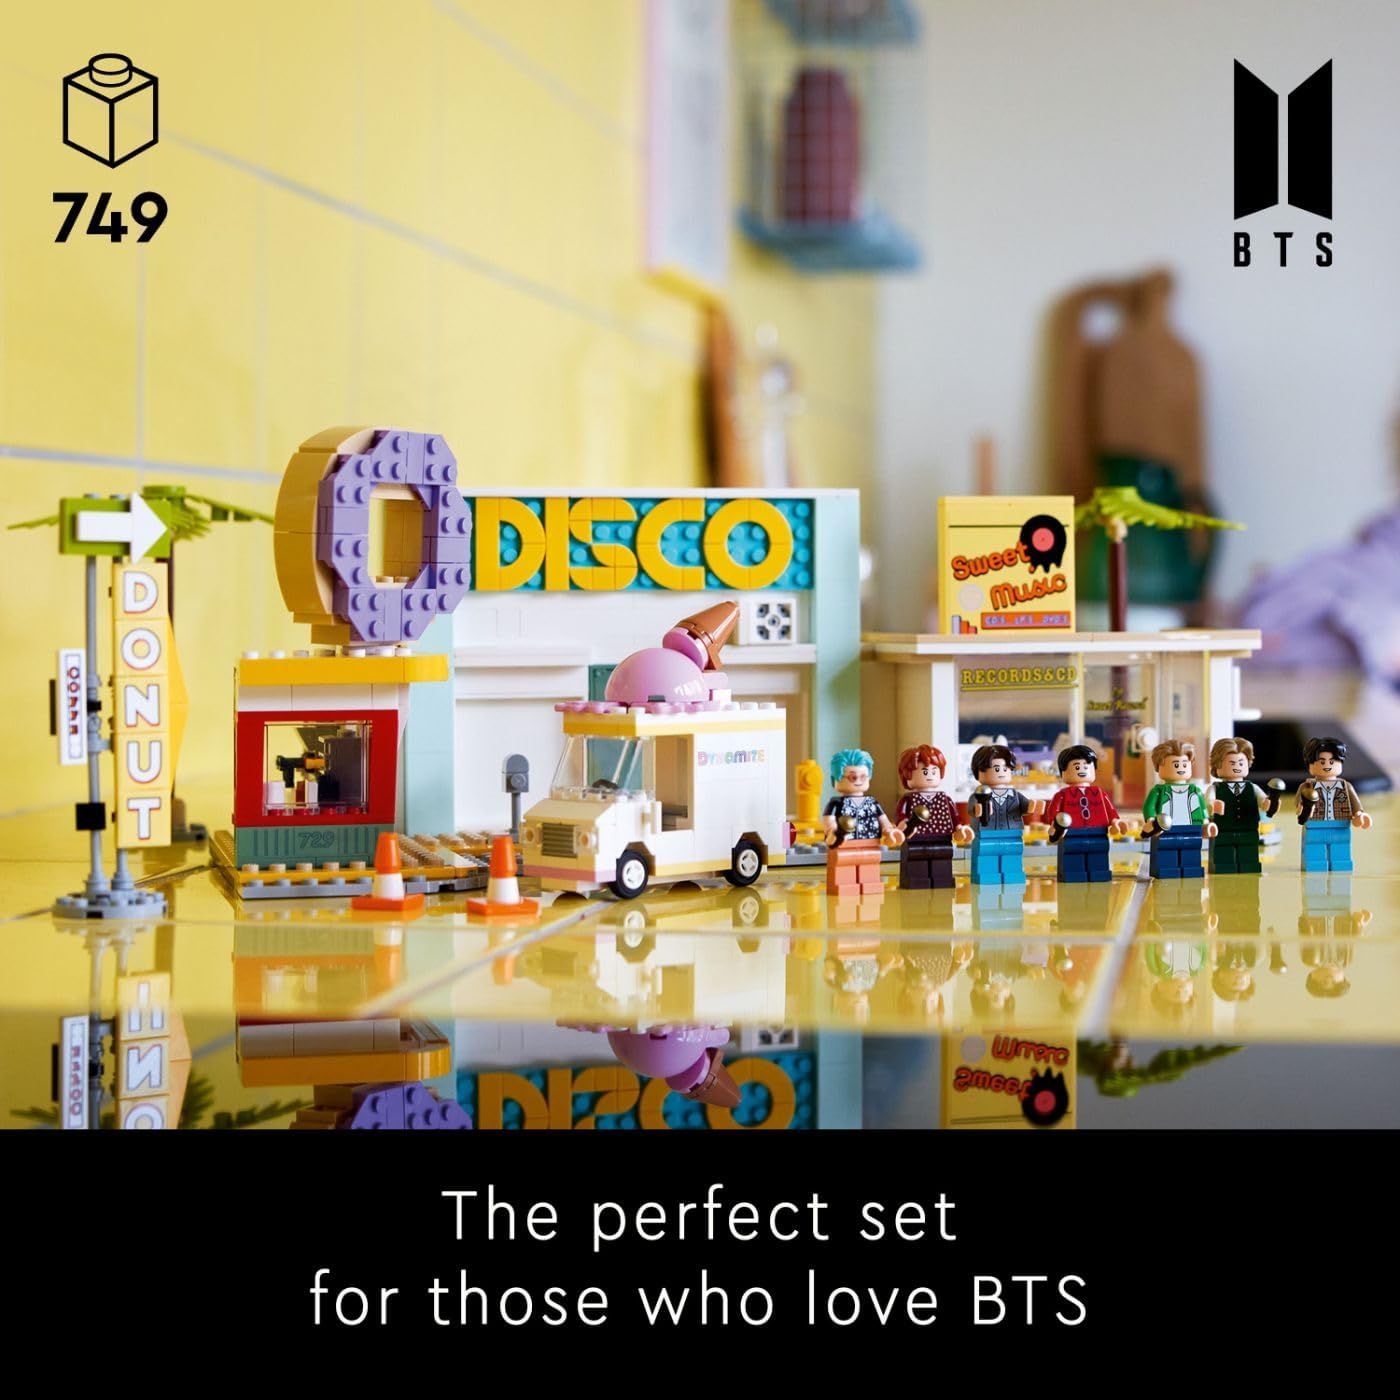 LEGO Ideas BTS Dynamite 21339 Model Kit for Adults, Gift Idea for BTS Fun with 7 Minifigures of The Famous K-pop Band, Features RM, Jin, SUGA, j-Hope, Jimin, V and Jung Kook